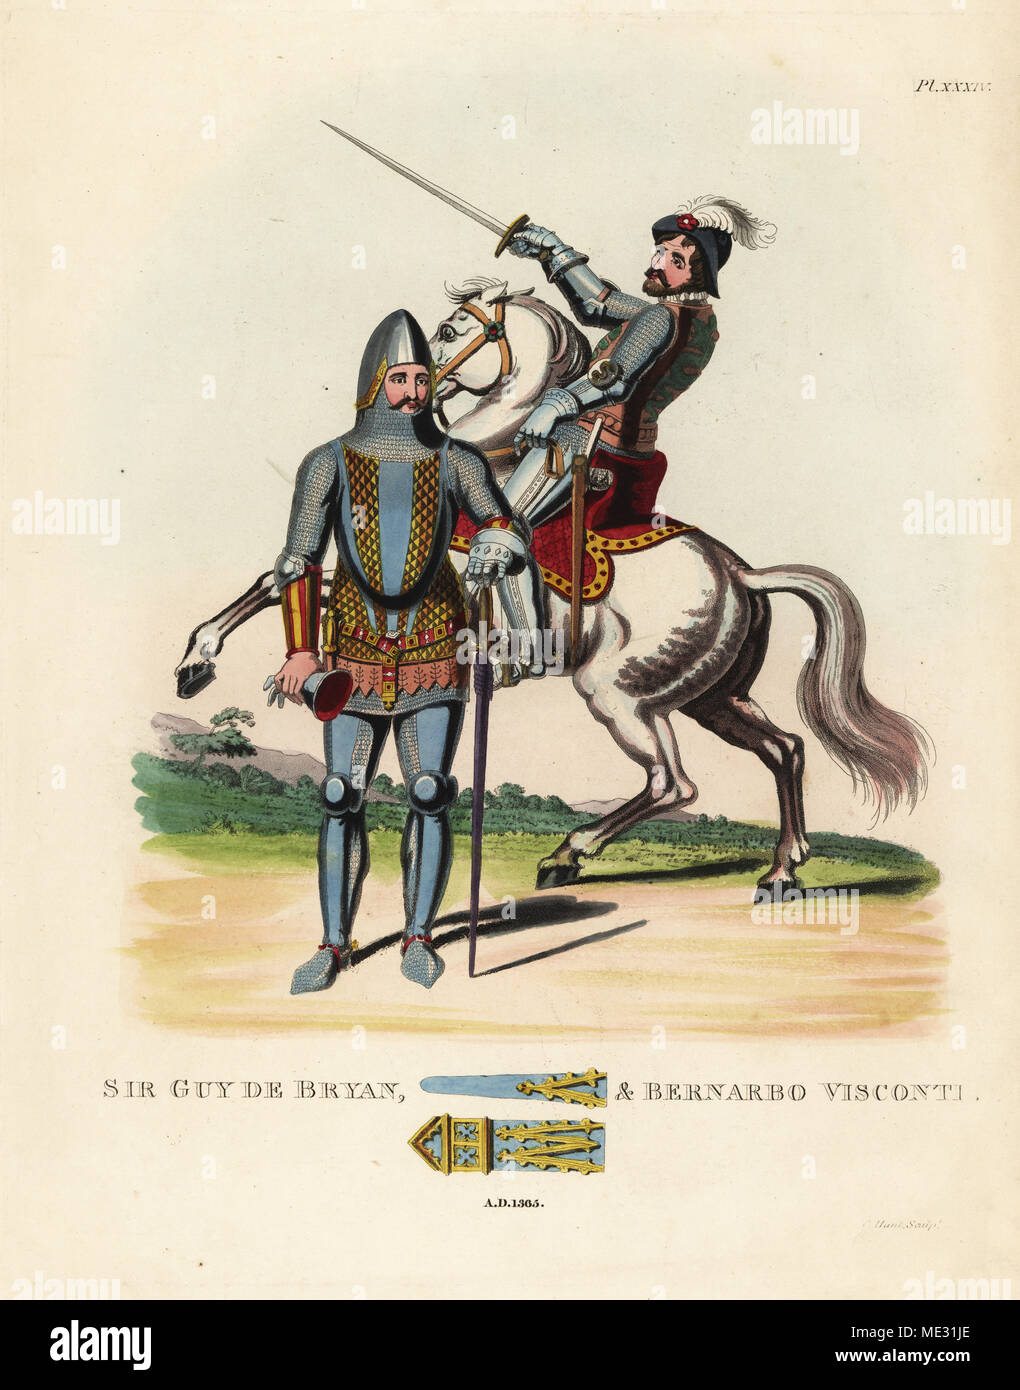 Sir Guy de Bryan, First Baron Bryan, English military commander and admiral, 1319-1390, and Bernarbo Visconti, Lord of Milan, Italian soldier and statesman, 1354-1385. Guy de Bryan wears mixed armour of chainmail and plate, short hauberk, brass elbow vandykes, gauntlets, chausses, and bassinet with camail. Visconti wears mixed armour, with chainmail hauberk and cuisses, genouillieres, jambs or steel boots and spurs. Handcoloured lithograph after an illustration by S.R. Meyrick from Sir Samuel Rush Meyrick's A Critical Inquiry into Antient Armour, John Dowding, London, 1842. Stock Photo